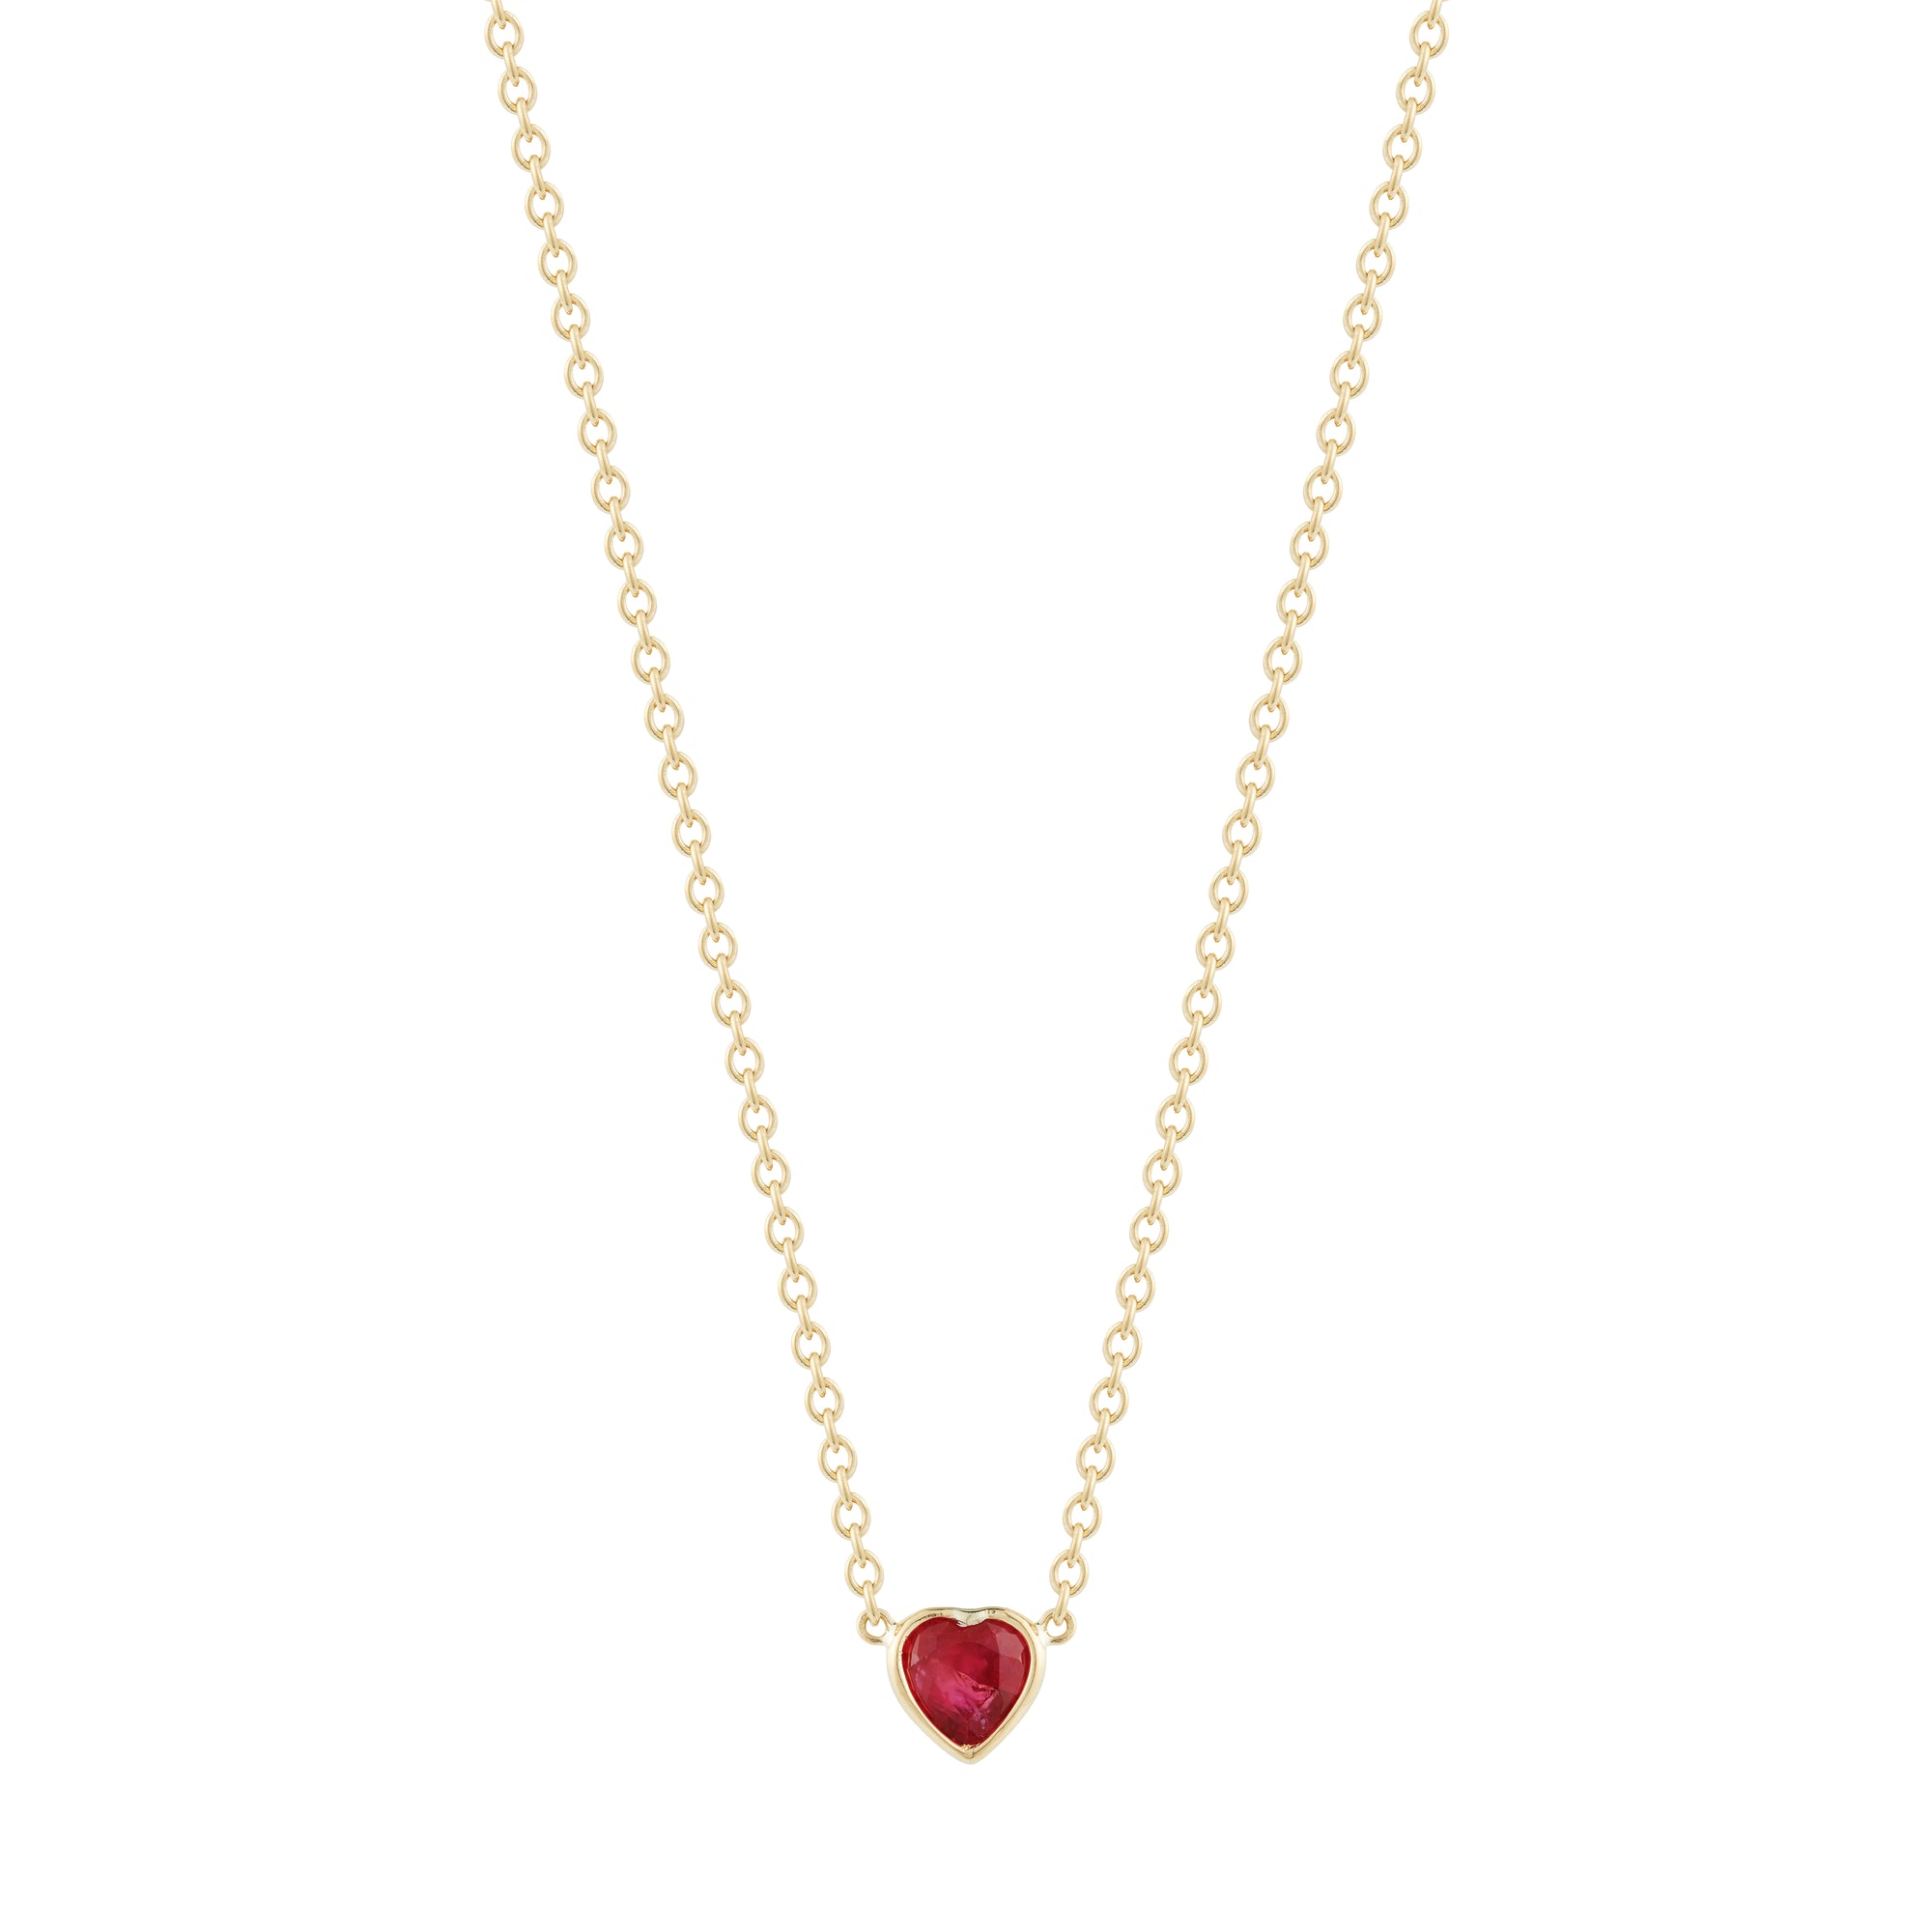 adorable and cute heart shaped red ruby on mid length 18k yellow gold chain by finn by candice pool neistat